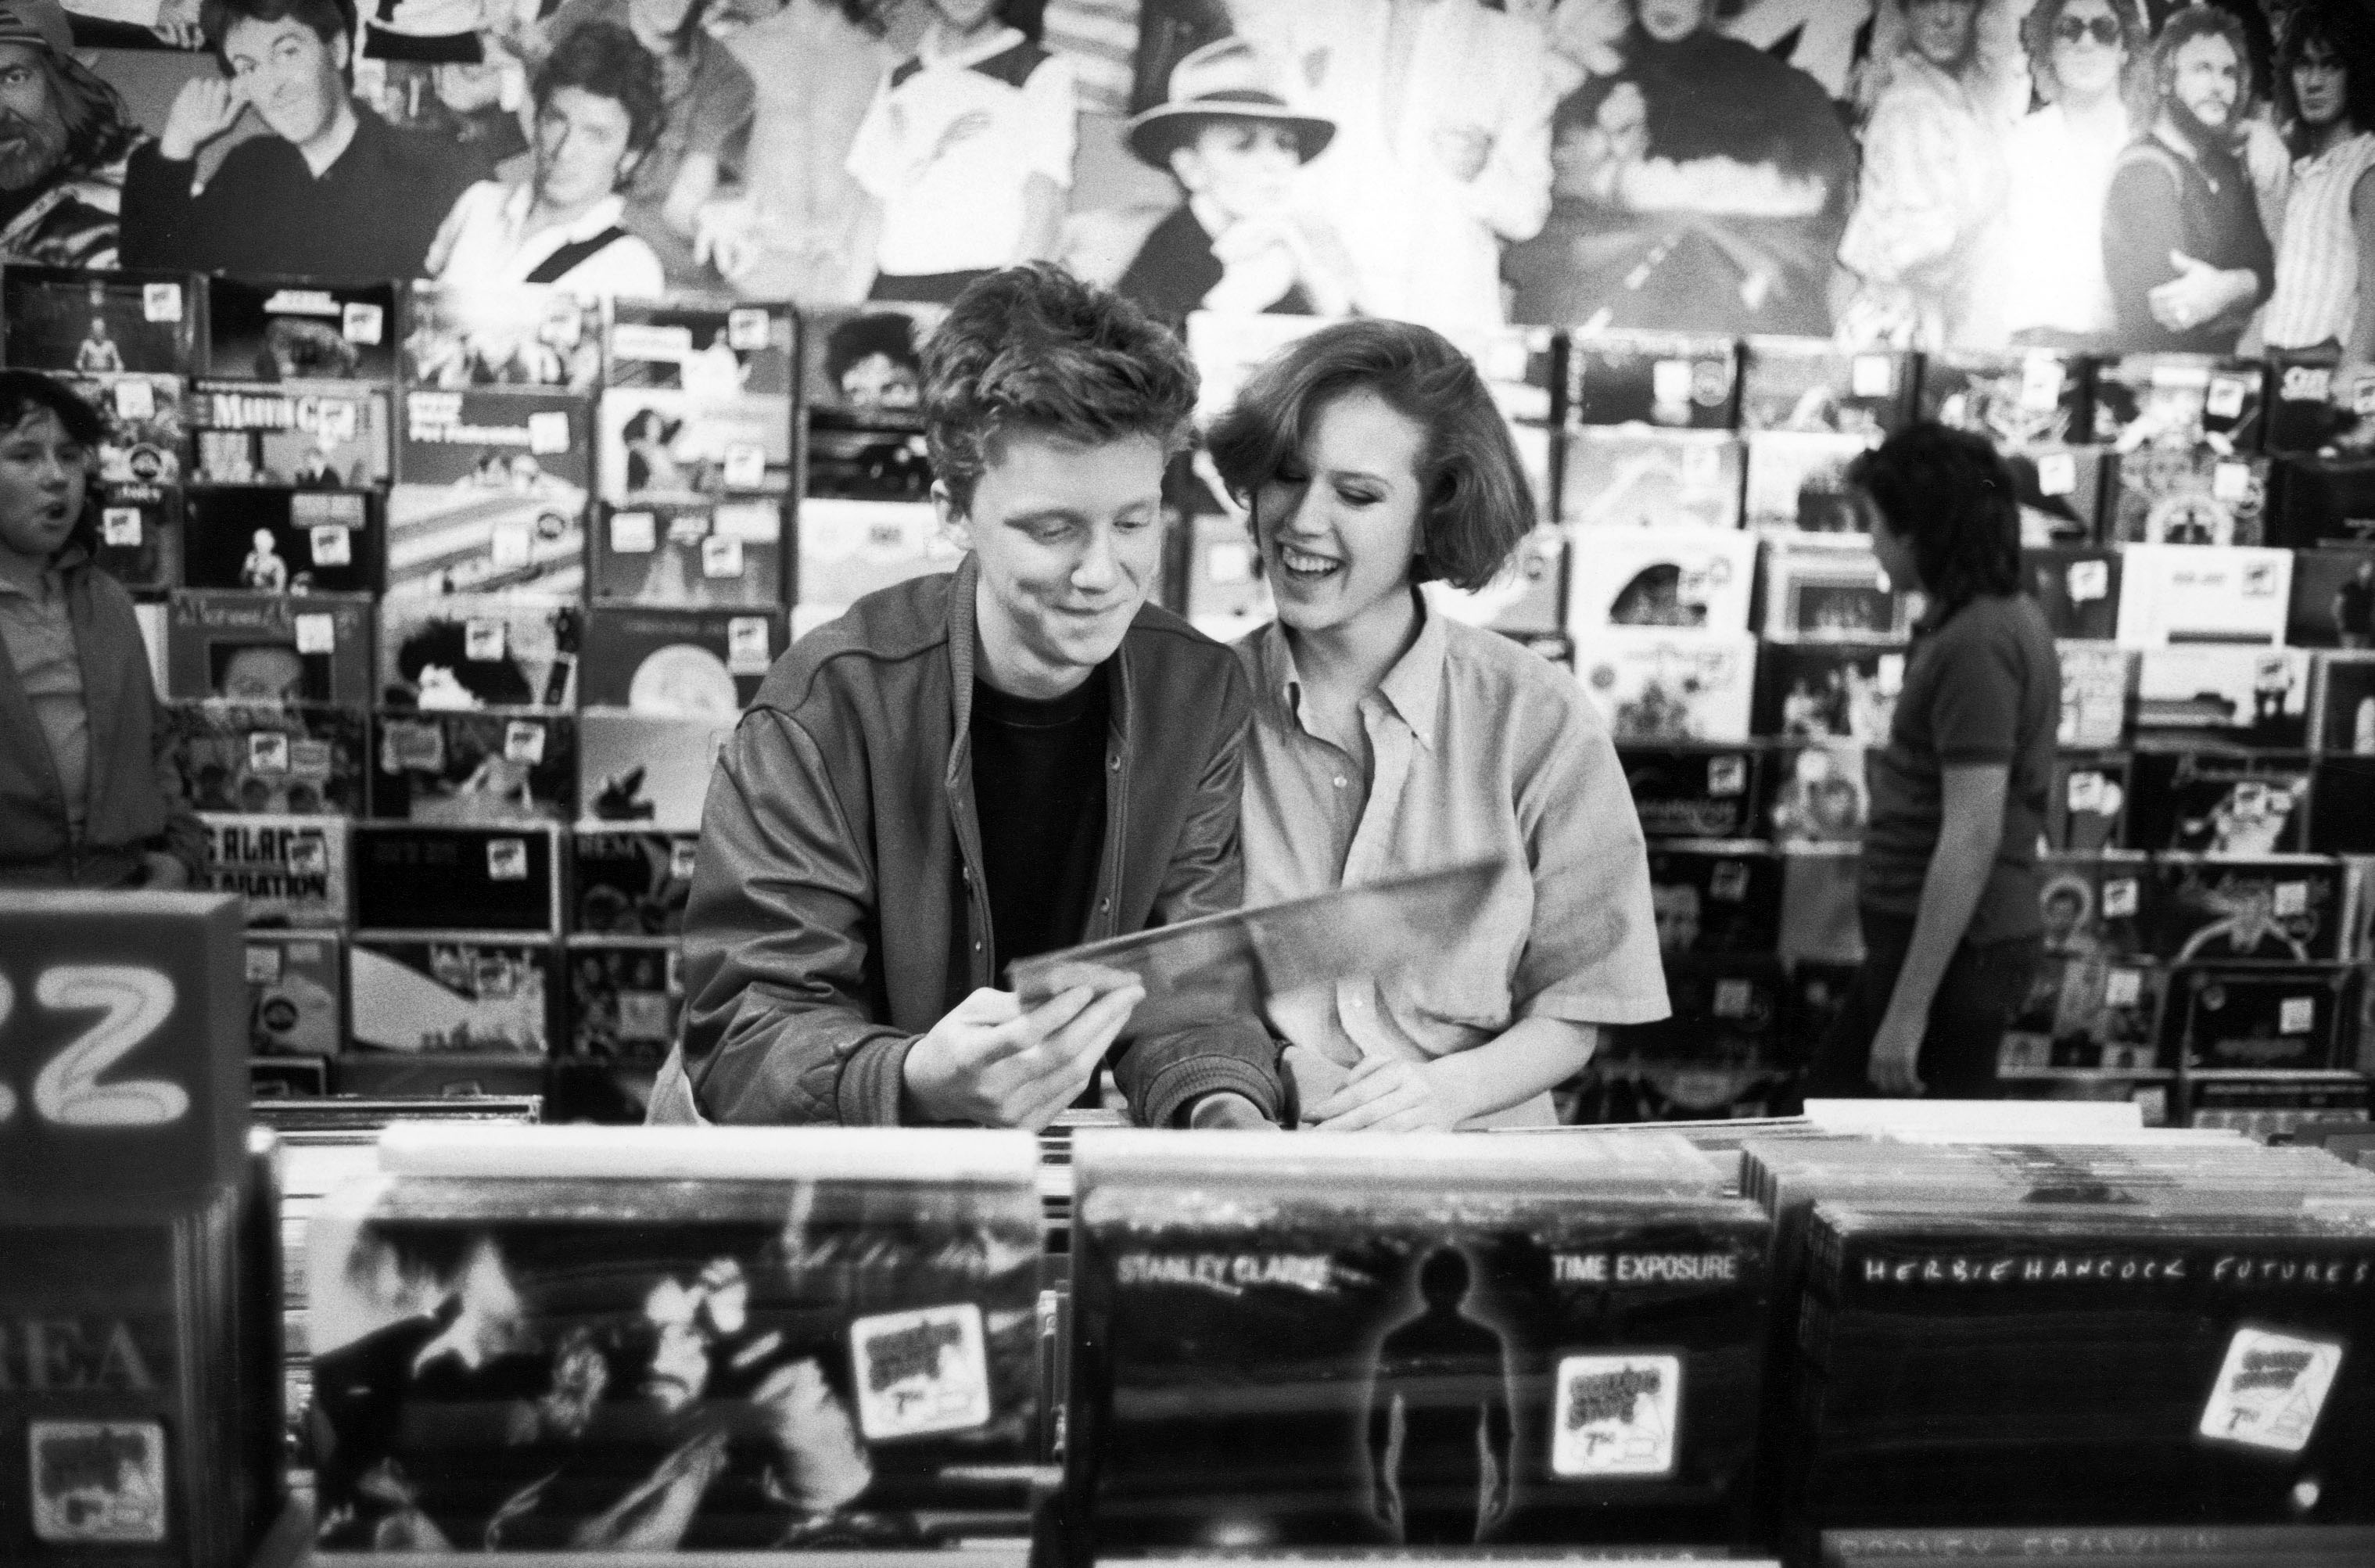 Actors Anthony Michael Hall and Molly Ringwald browsing in record shop during break in location shooting of The Breakfast Club. | Source: Getty Images